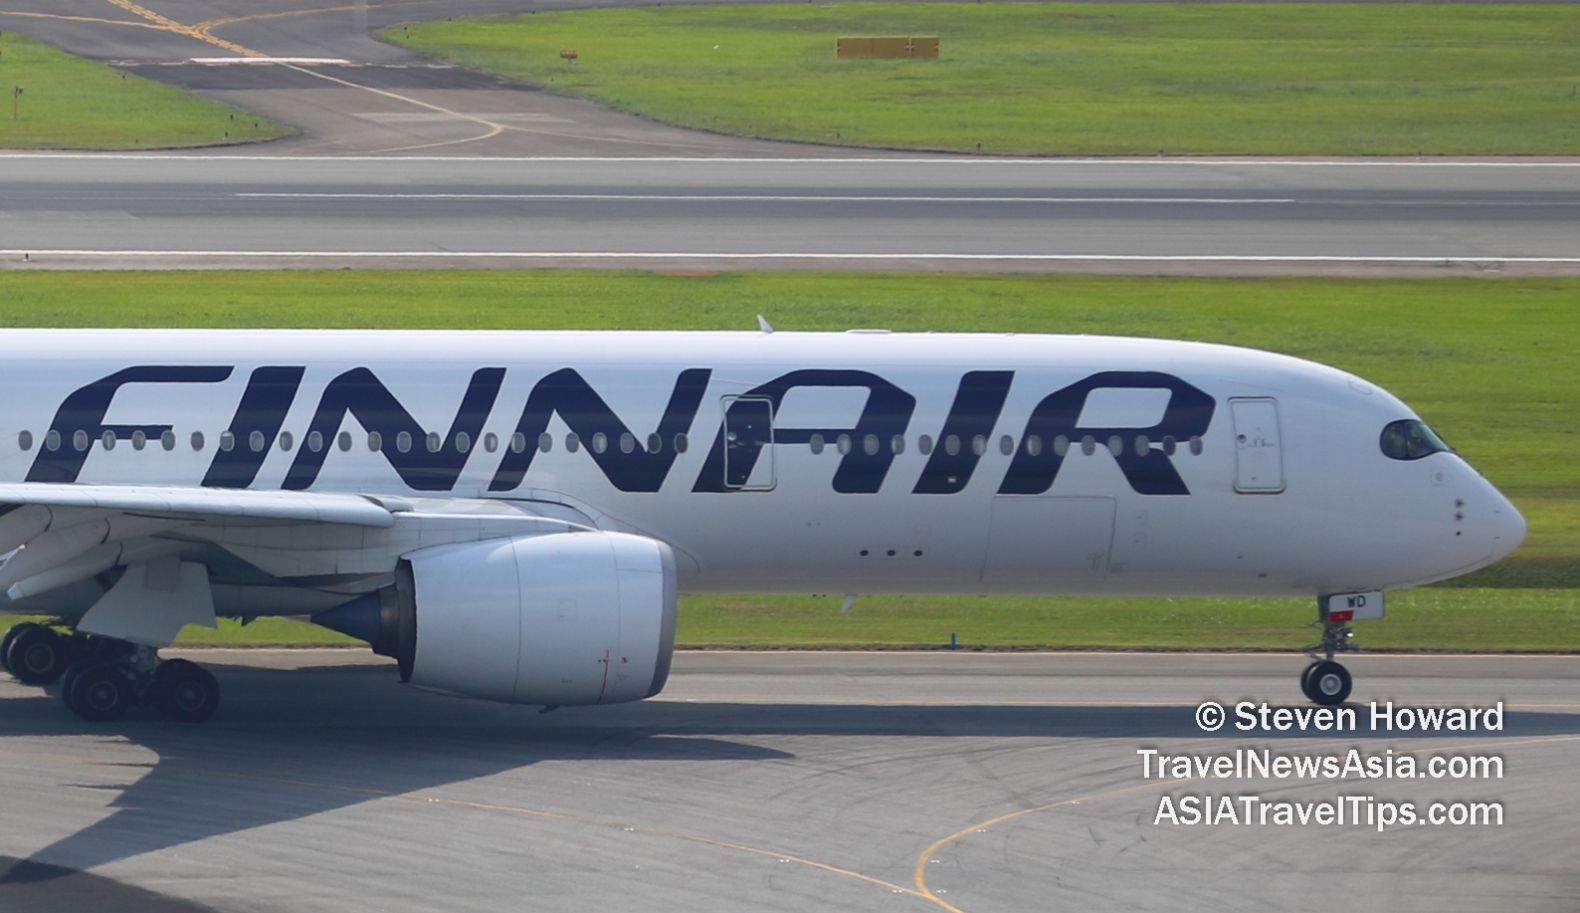 Finnair A350-900 reg: OH-LWD. Picture by Steven Howard of TravelNewsAsia.com Click to enlarge.